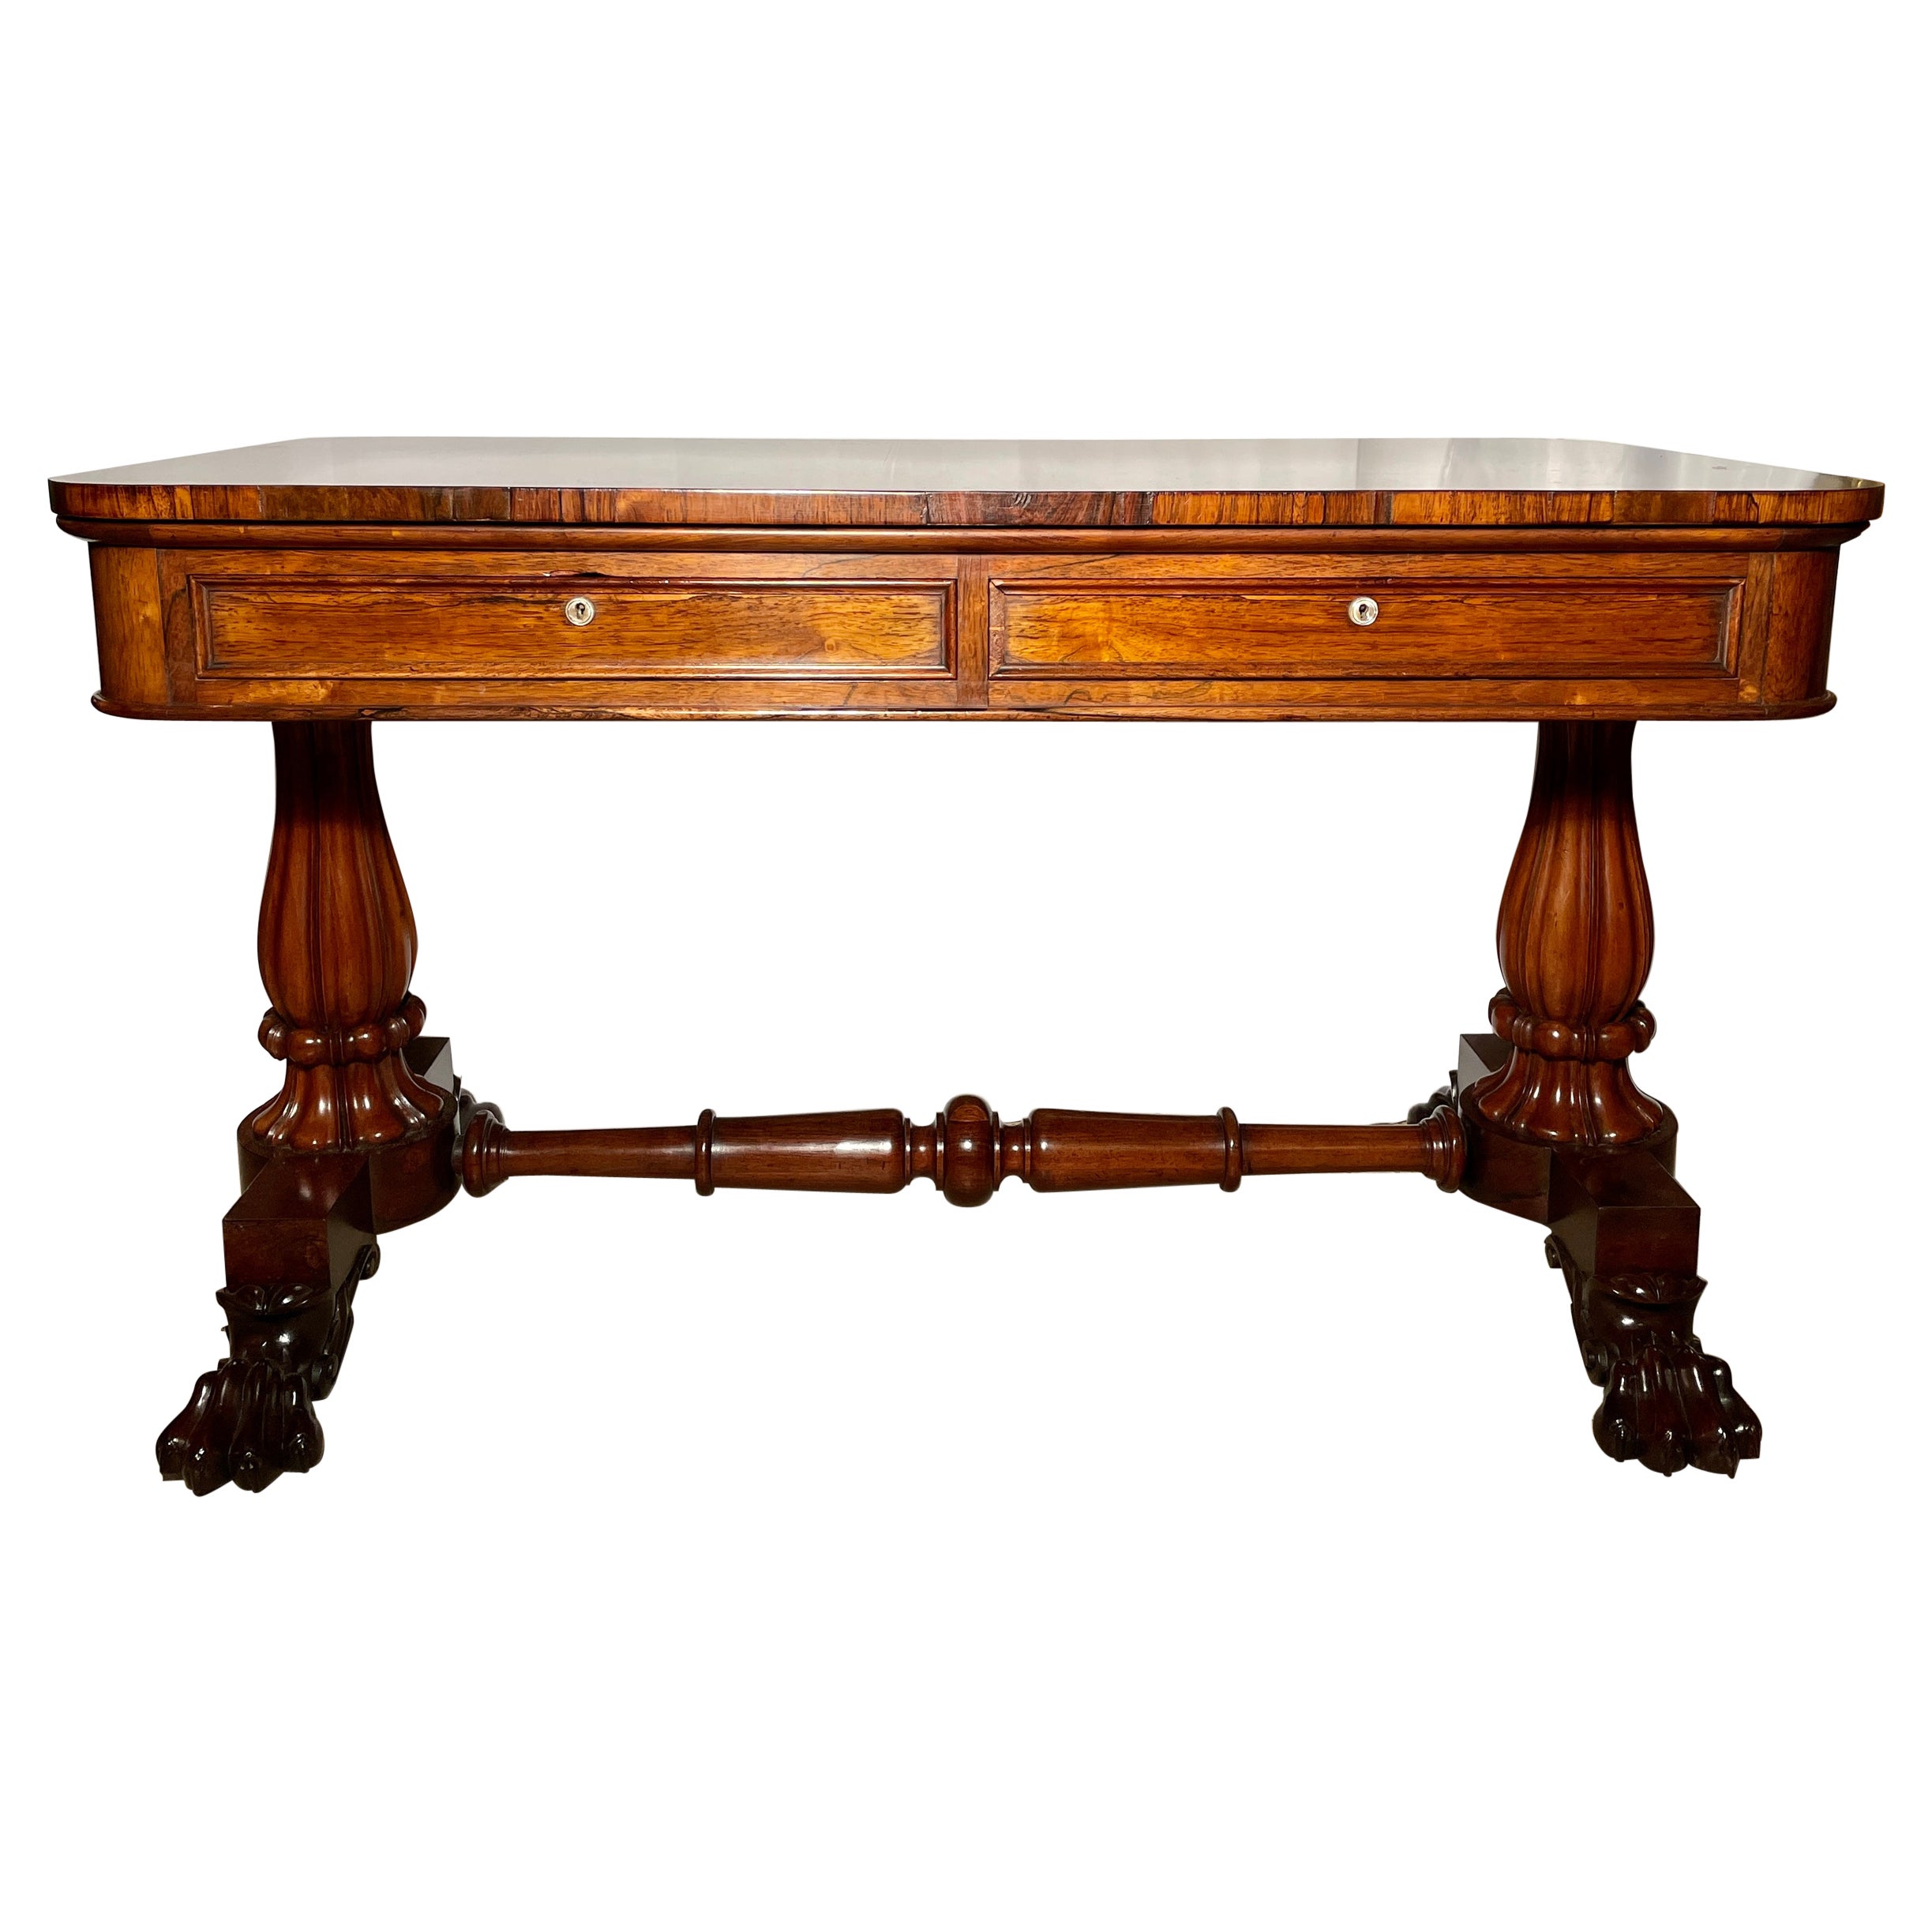 Antique English Rosewood Library Table, Circa 1860